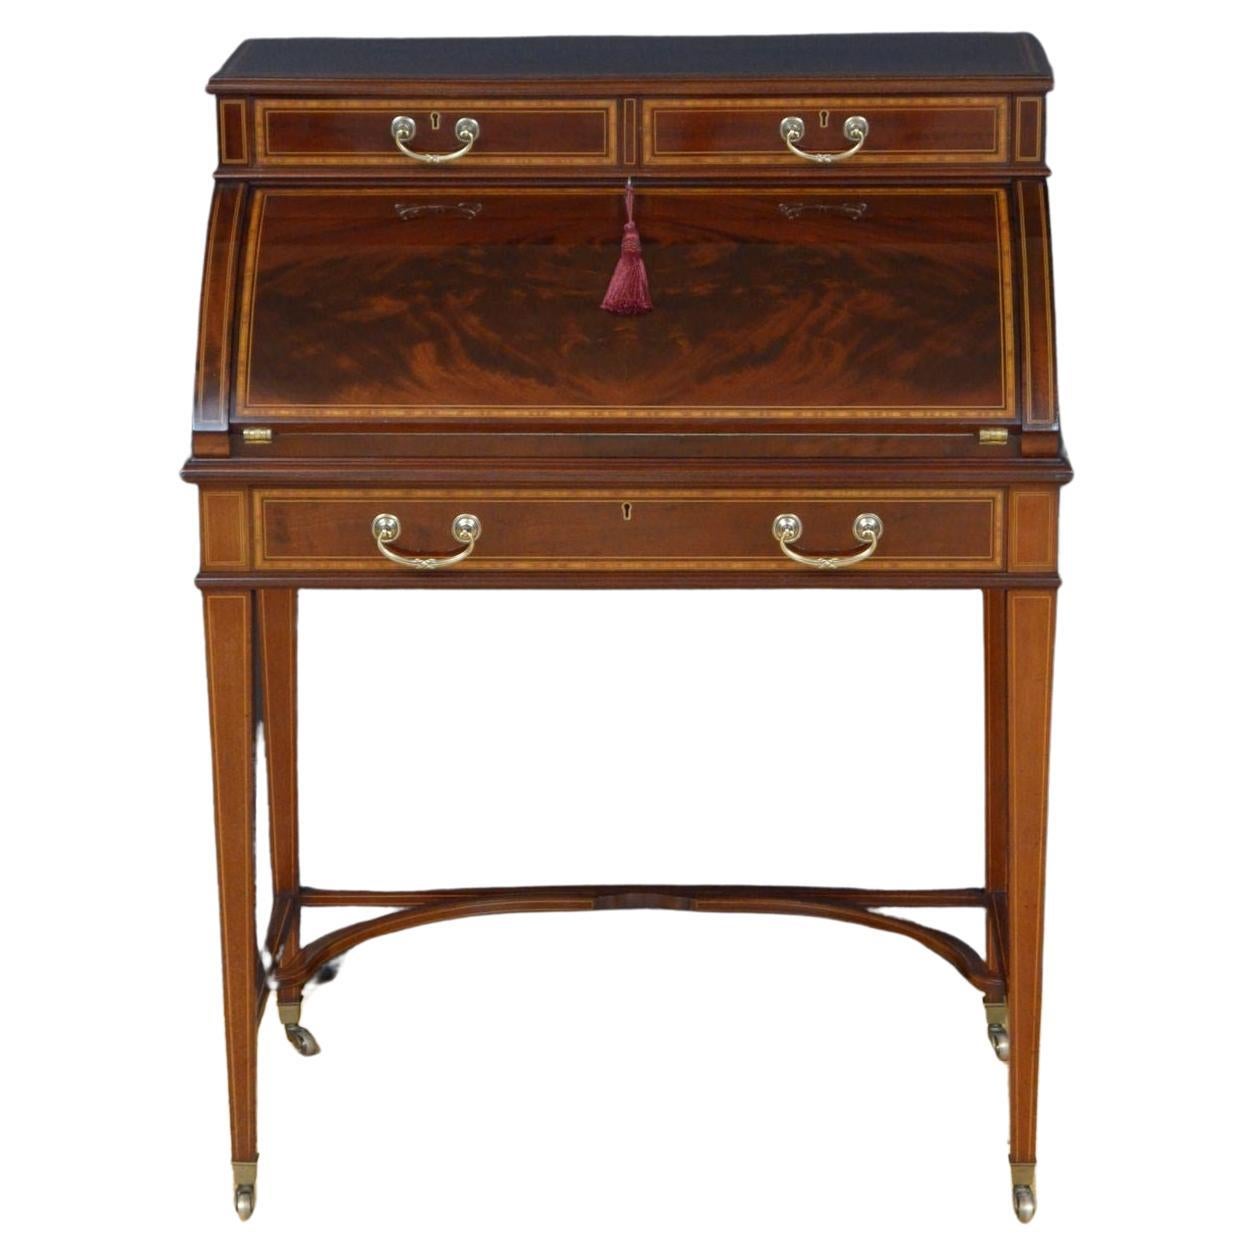 Exhibition Quality Mahogany Cylinder Bureau by Maple & Co For Sale